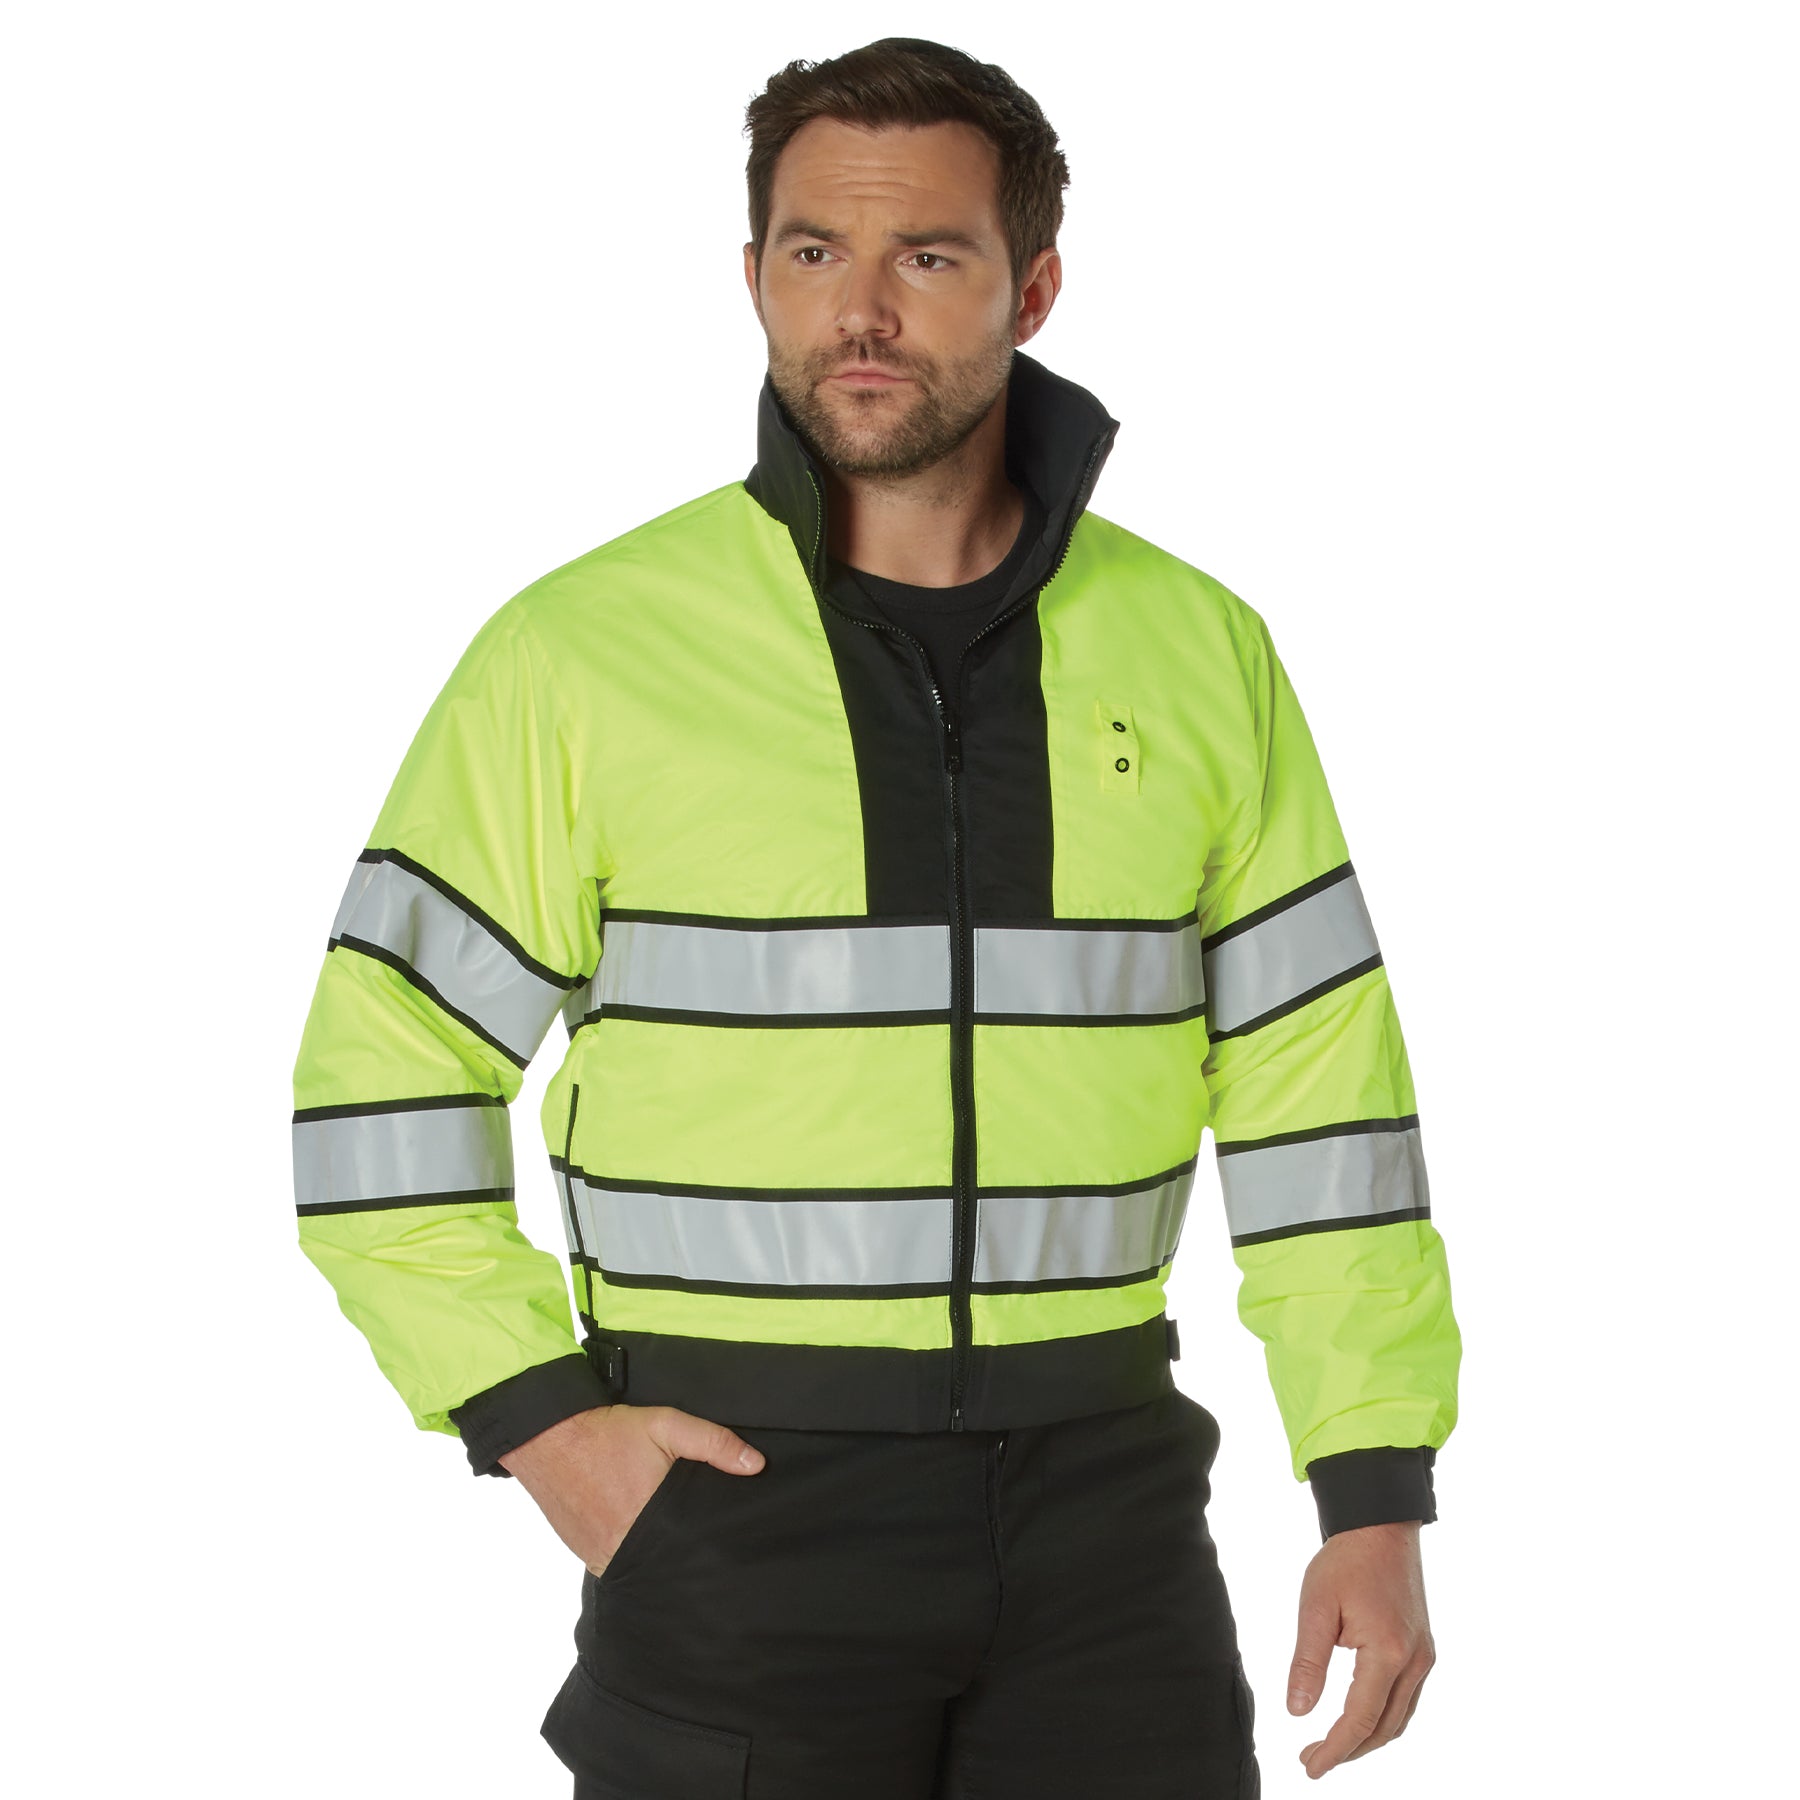 [Public Safety] Nylon Security Reversible HI-Visibility Forced Entry Uniform Jackets Safety Green